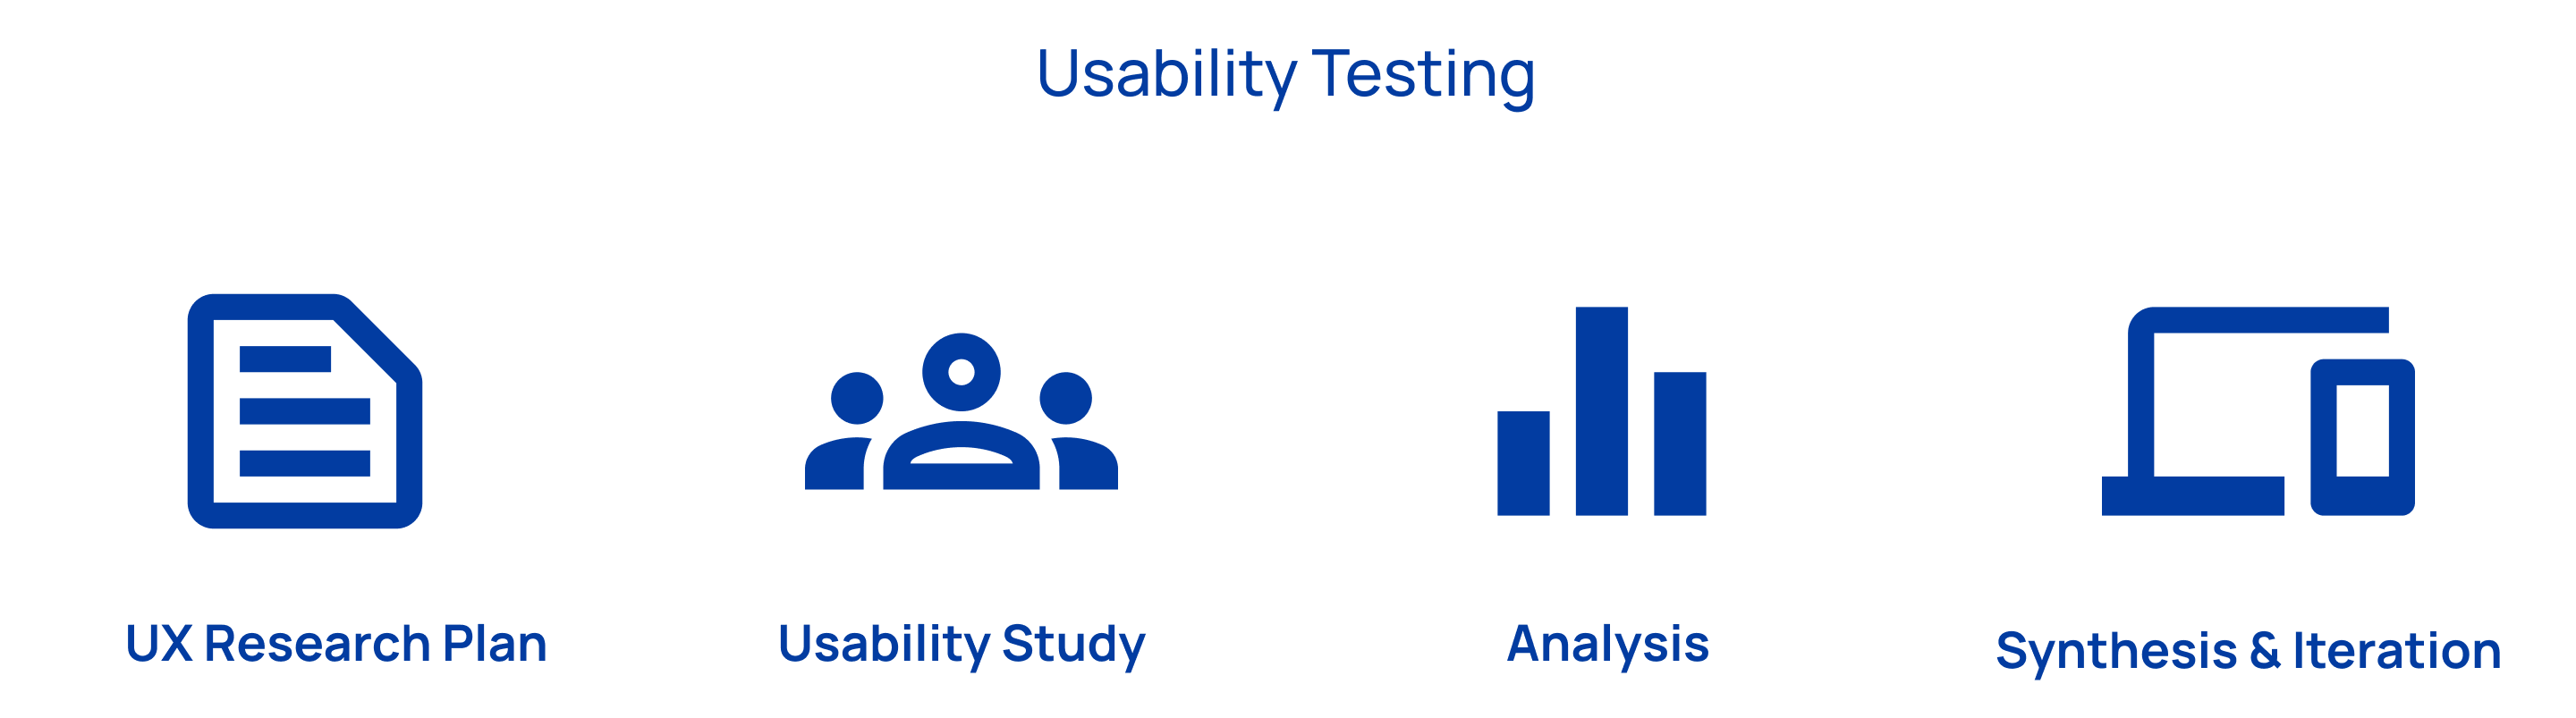 Diagram explaing user experience research and usability testing process